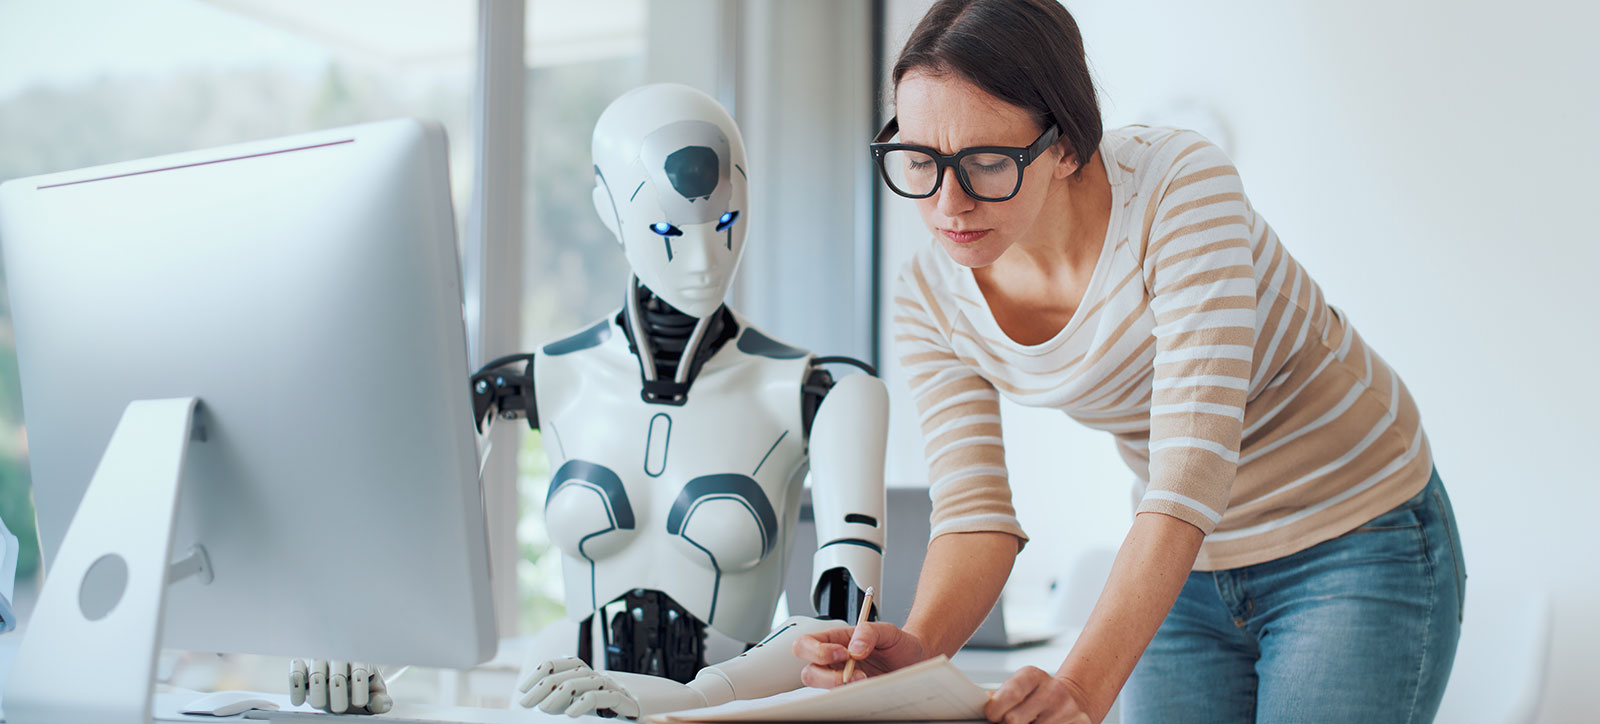 A human employee works with her AI-powered robotic colleague at an office desk, demonstrating the challenges of working with generative AI.